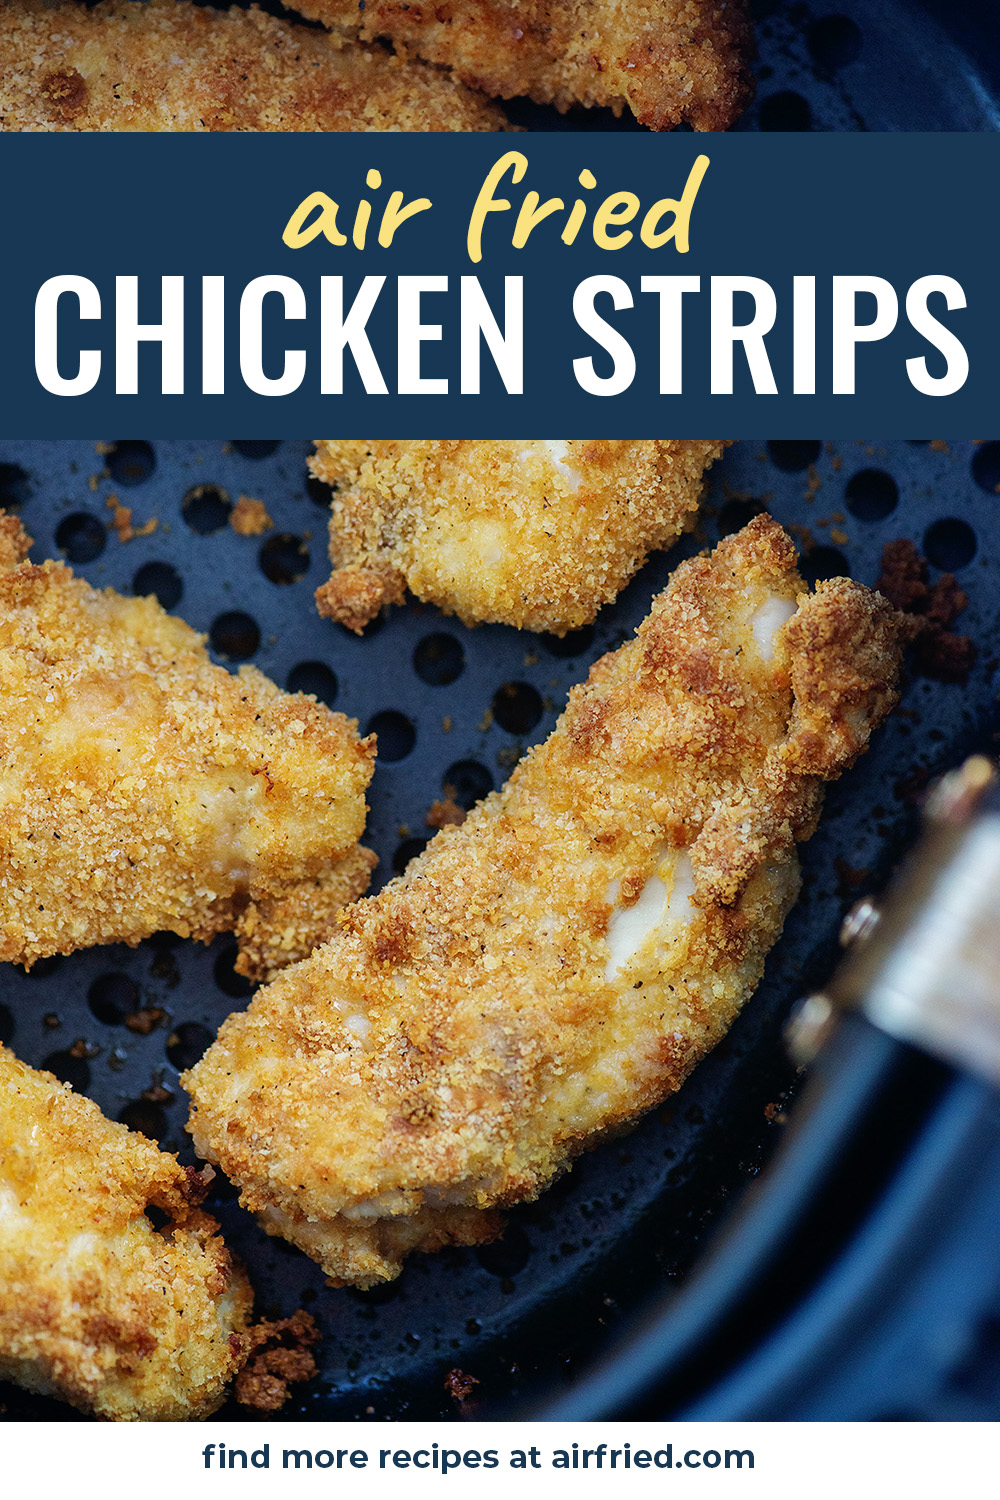 I love the classic chicken strip in my air fryer, but these are better!  #chicken #airfried #recipe